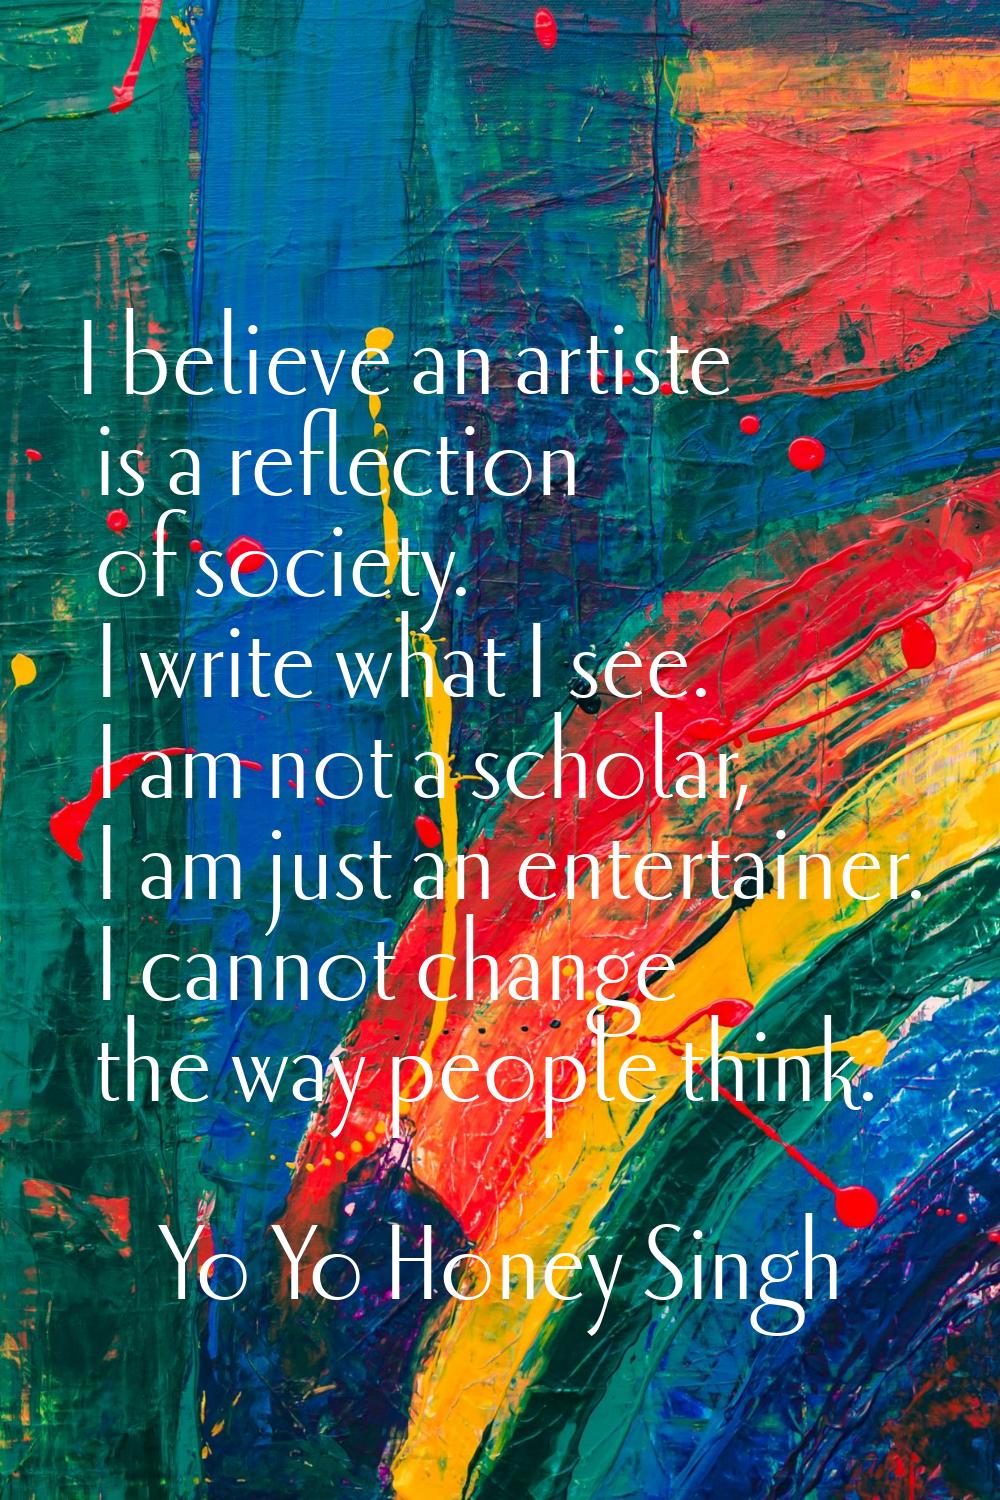 I believe an artiste is a reflection of society. I write what I see. I am not a scholar, I am just 